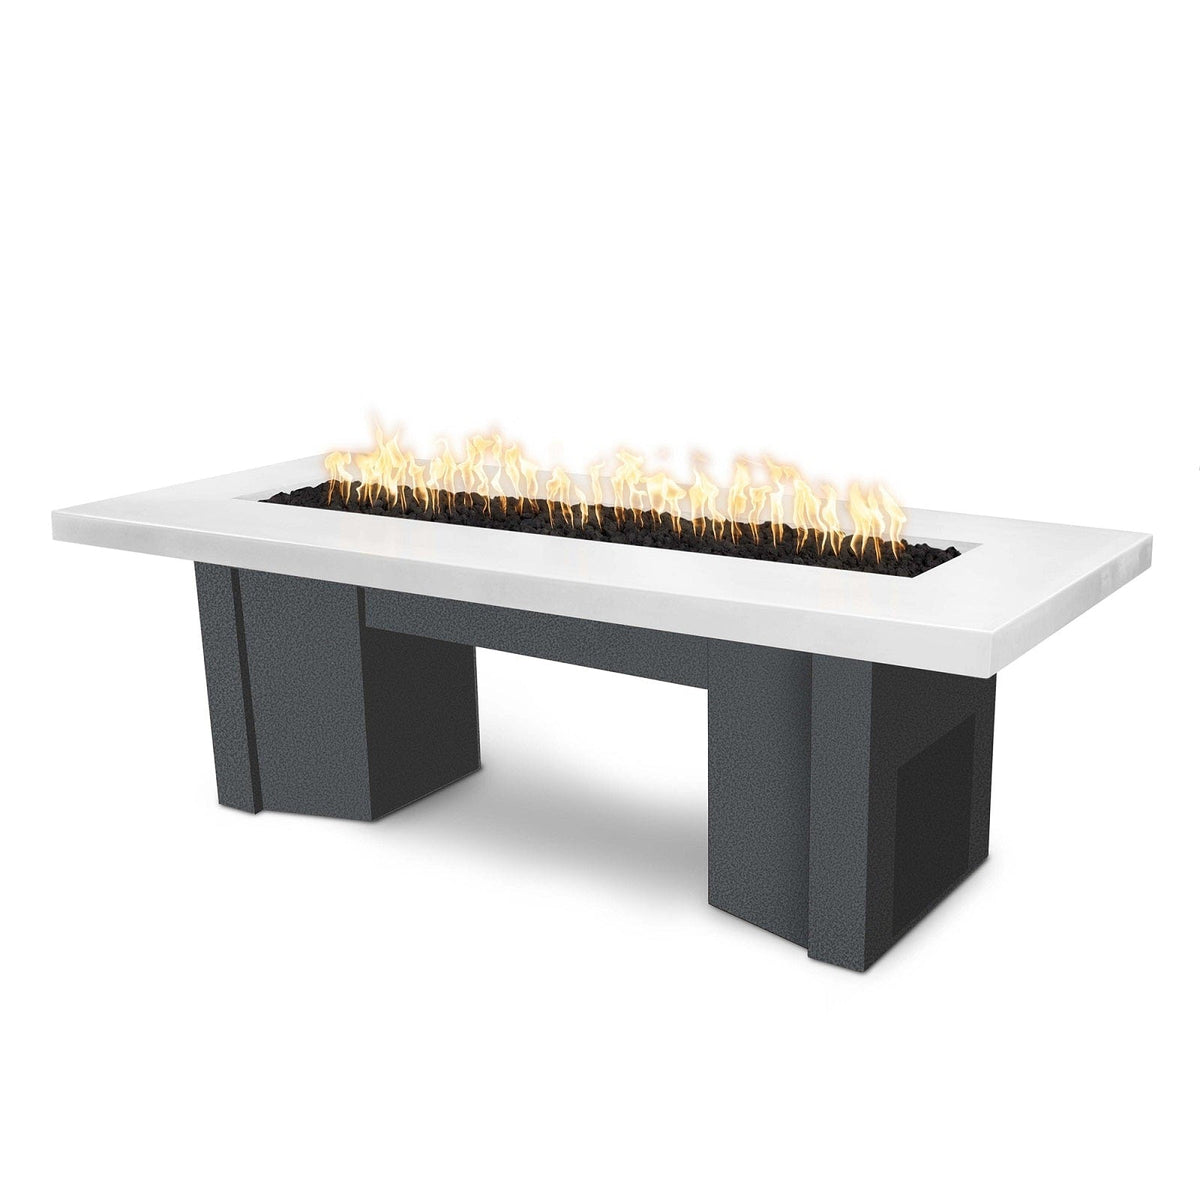 The Outdoor Plus Fire Features Limestone (-LIM) / Silver Vein Powder Coated Steel (-SLV) The Outdoor Plus 60&quot; Alameda Fire Table Smooth Concrete in Natural Gas - Flame Sense System with Push Button Spark Igniter / OPT-ALMGFRC60FSEN-NG